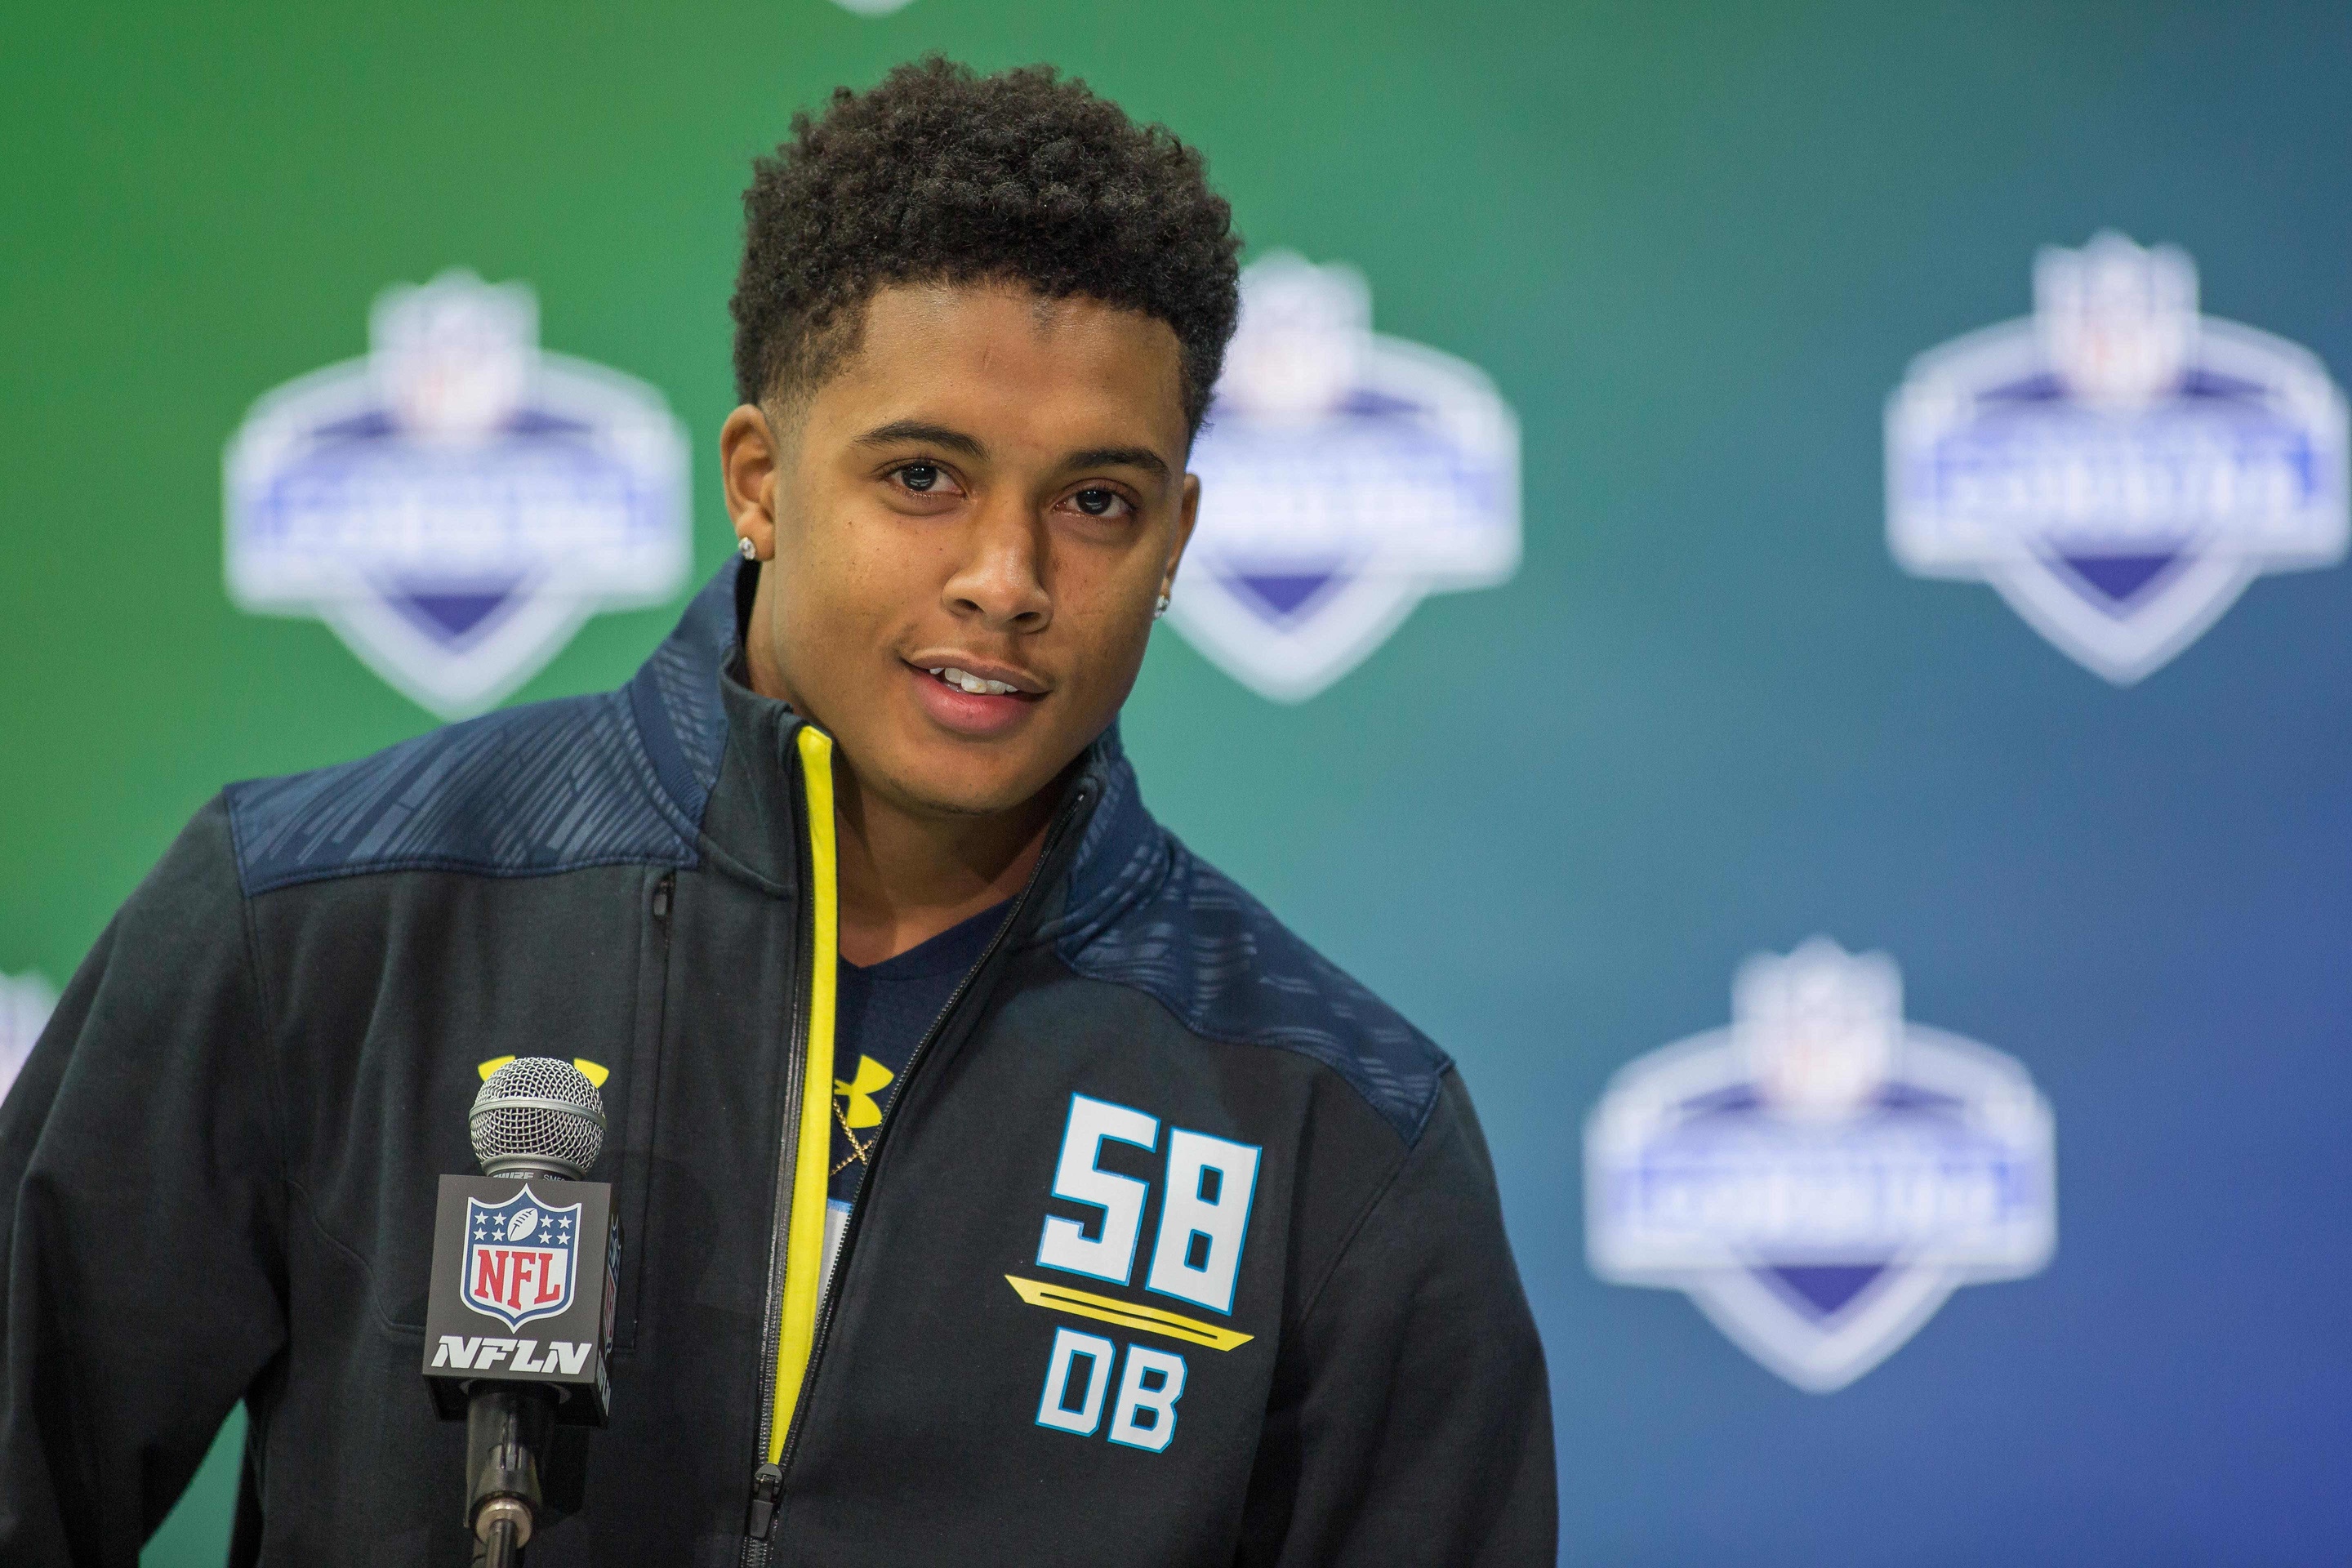 Mar 5, 2017; Indianapolis, IN, USA; Florida Gators defensive back Quincy Wilson speaks to the media during the 2017 combine at Indiana Convention Center. Mandatory Credit: Trevor Ruszkowski-USA TODAY Sports